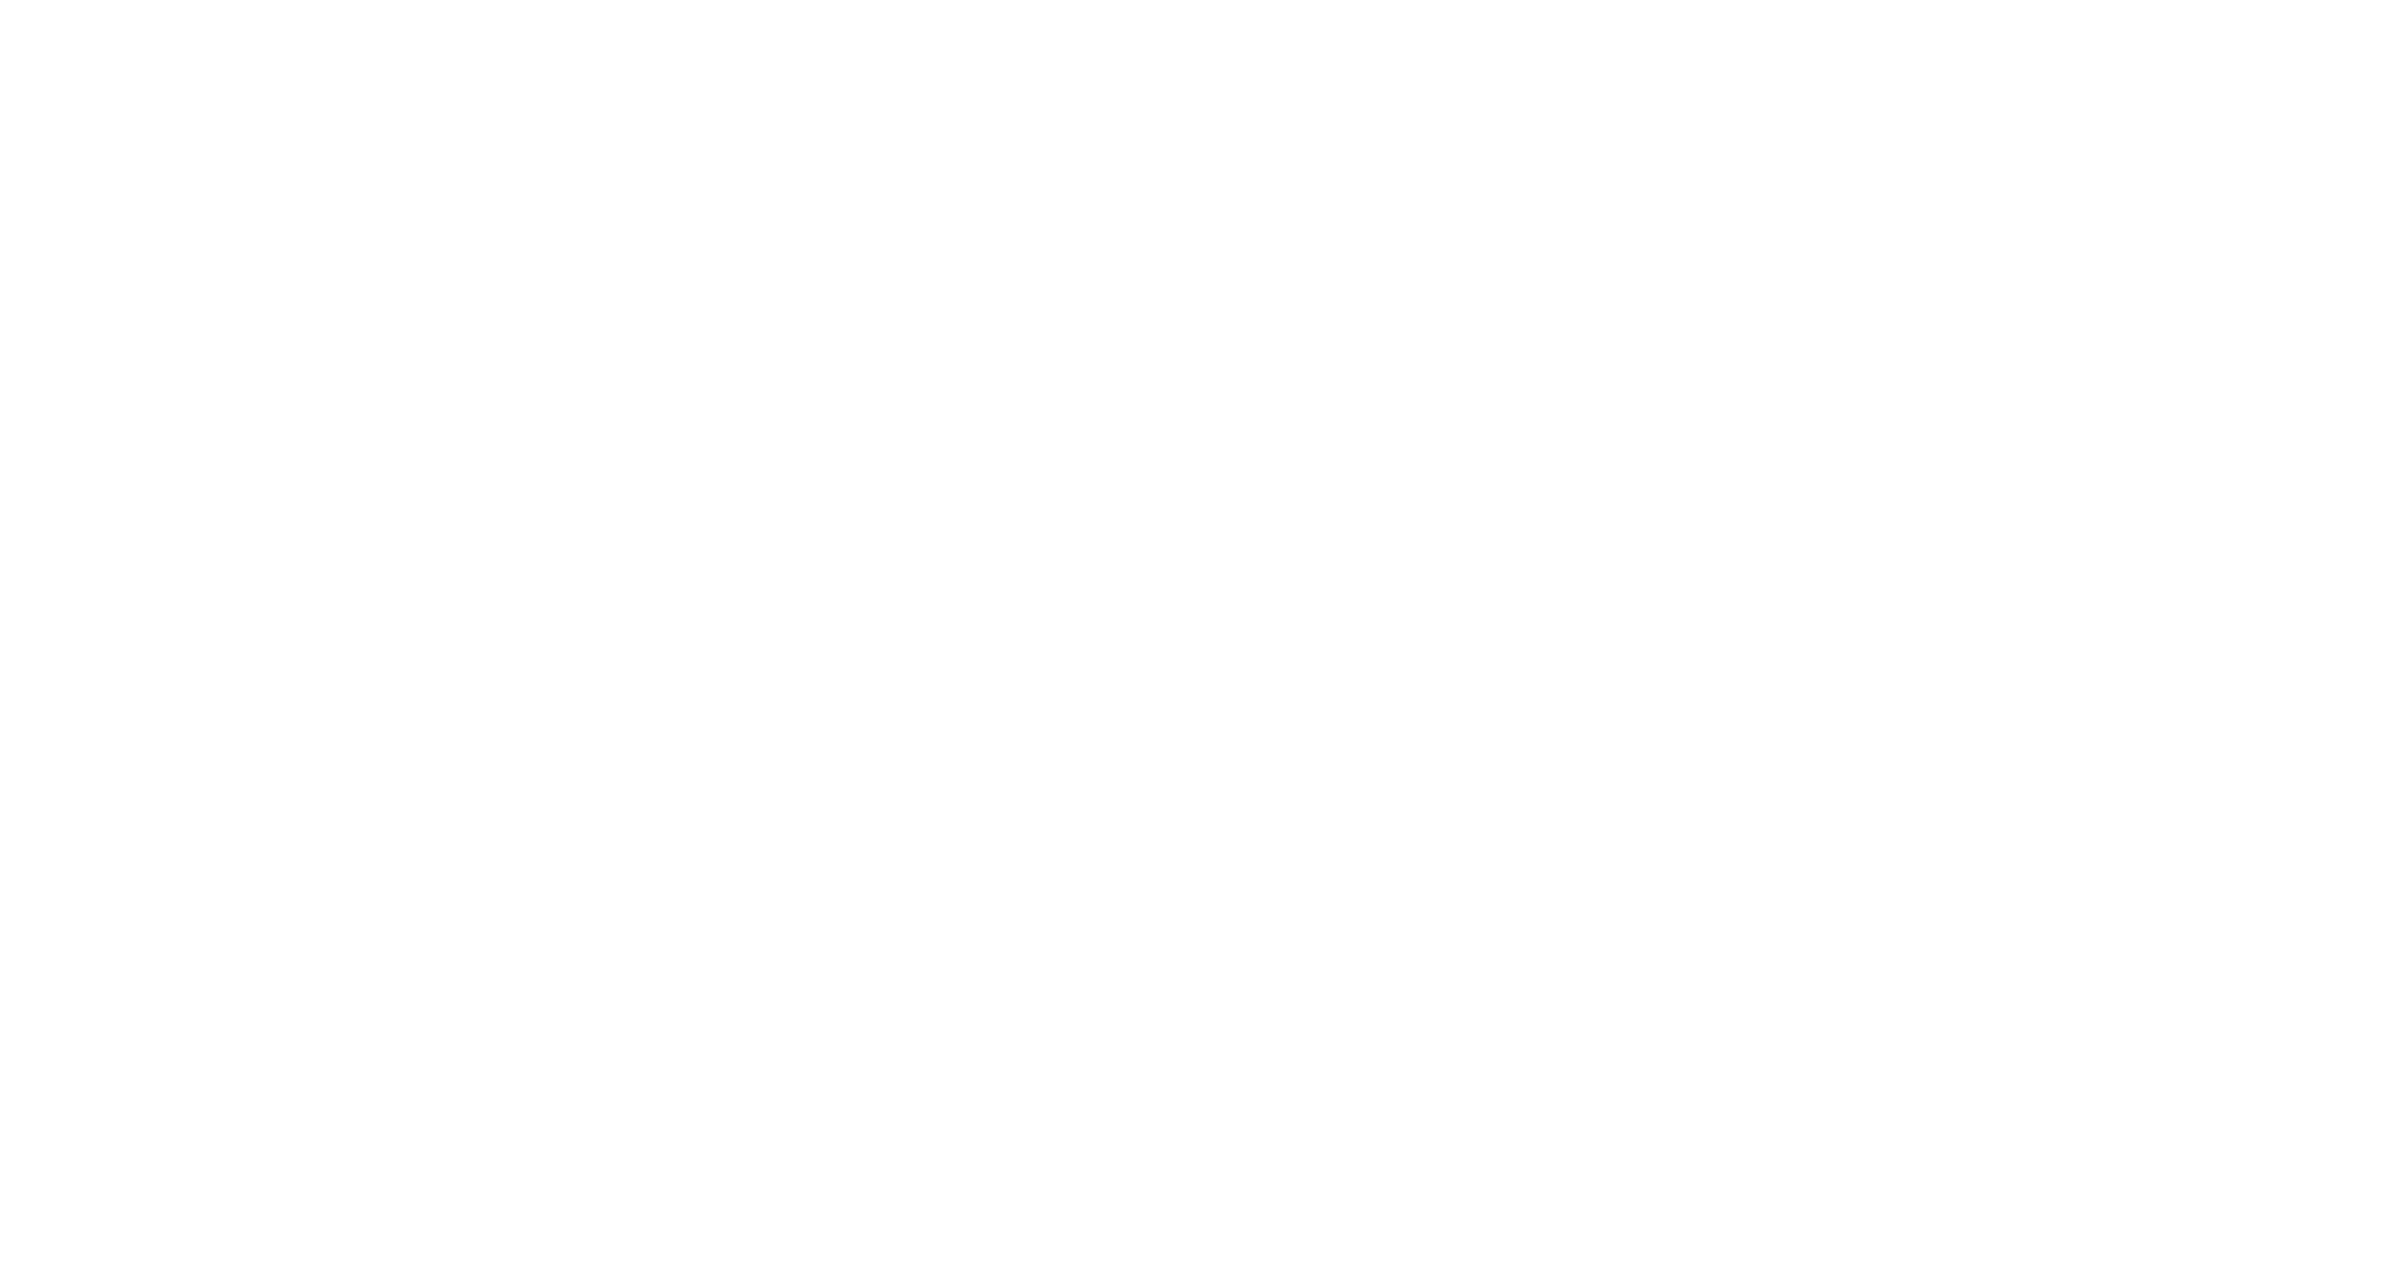 The Eight project logo